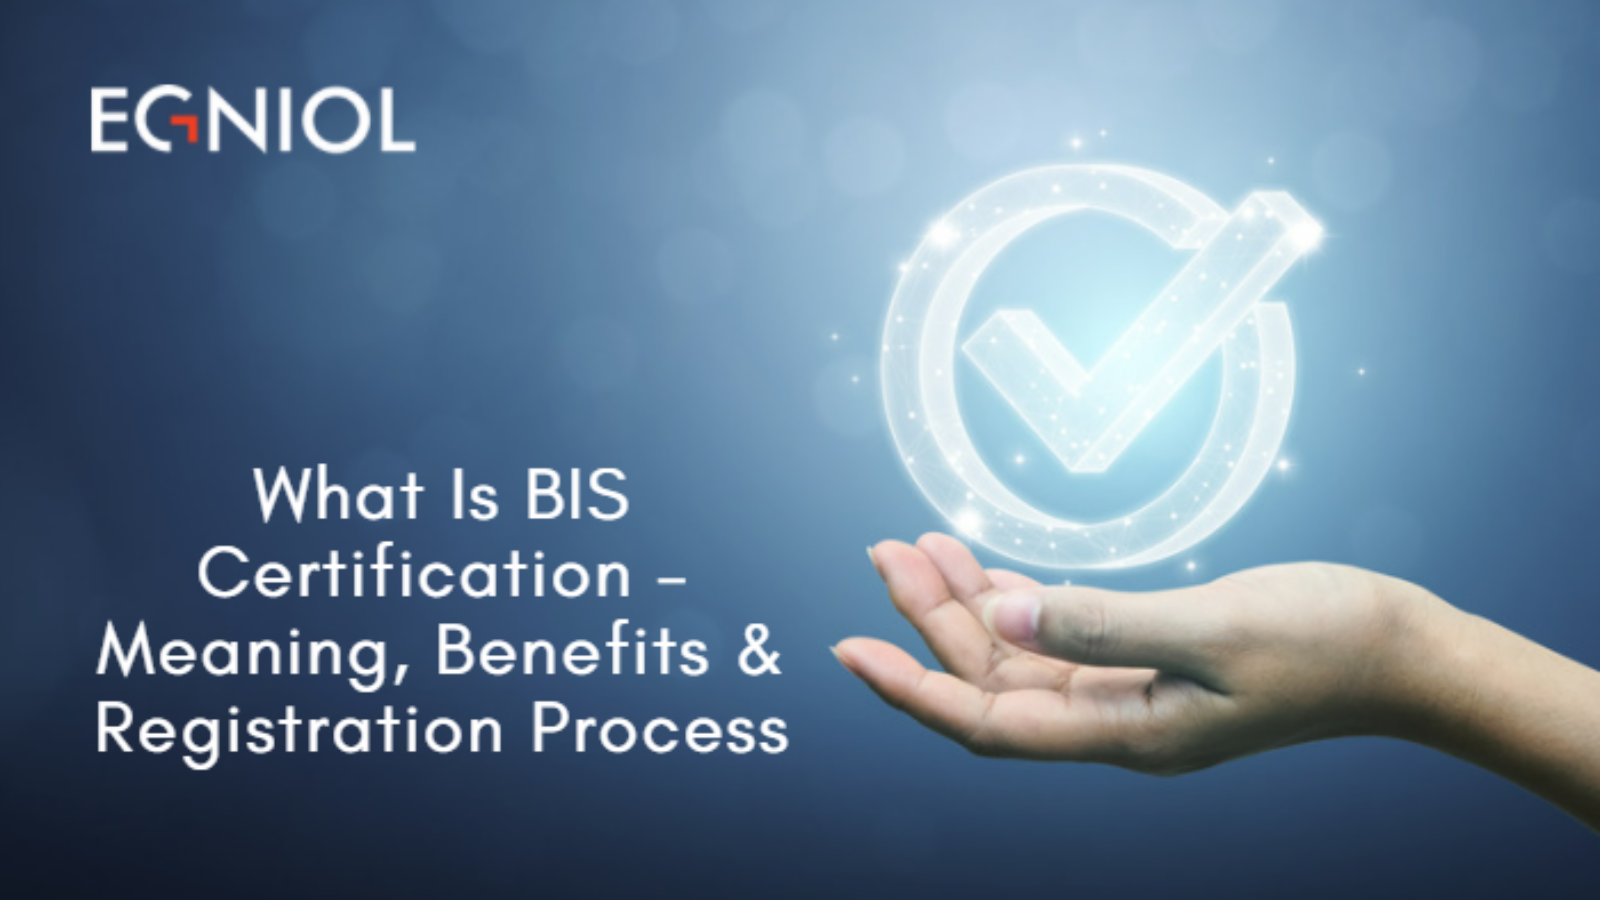 What Is BIS Certification – Benefits, Meaning & Registration Process - By Egniol